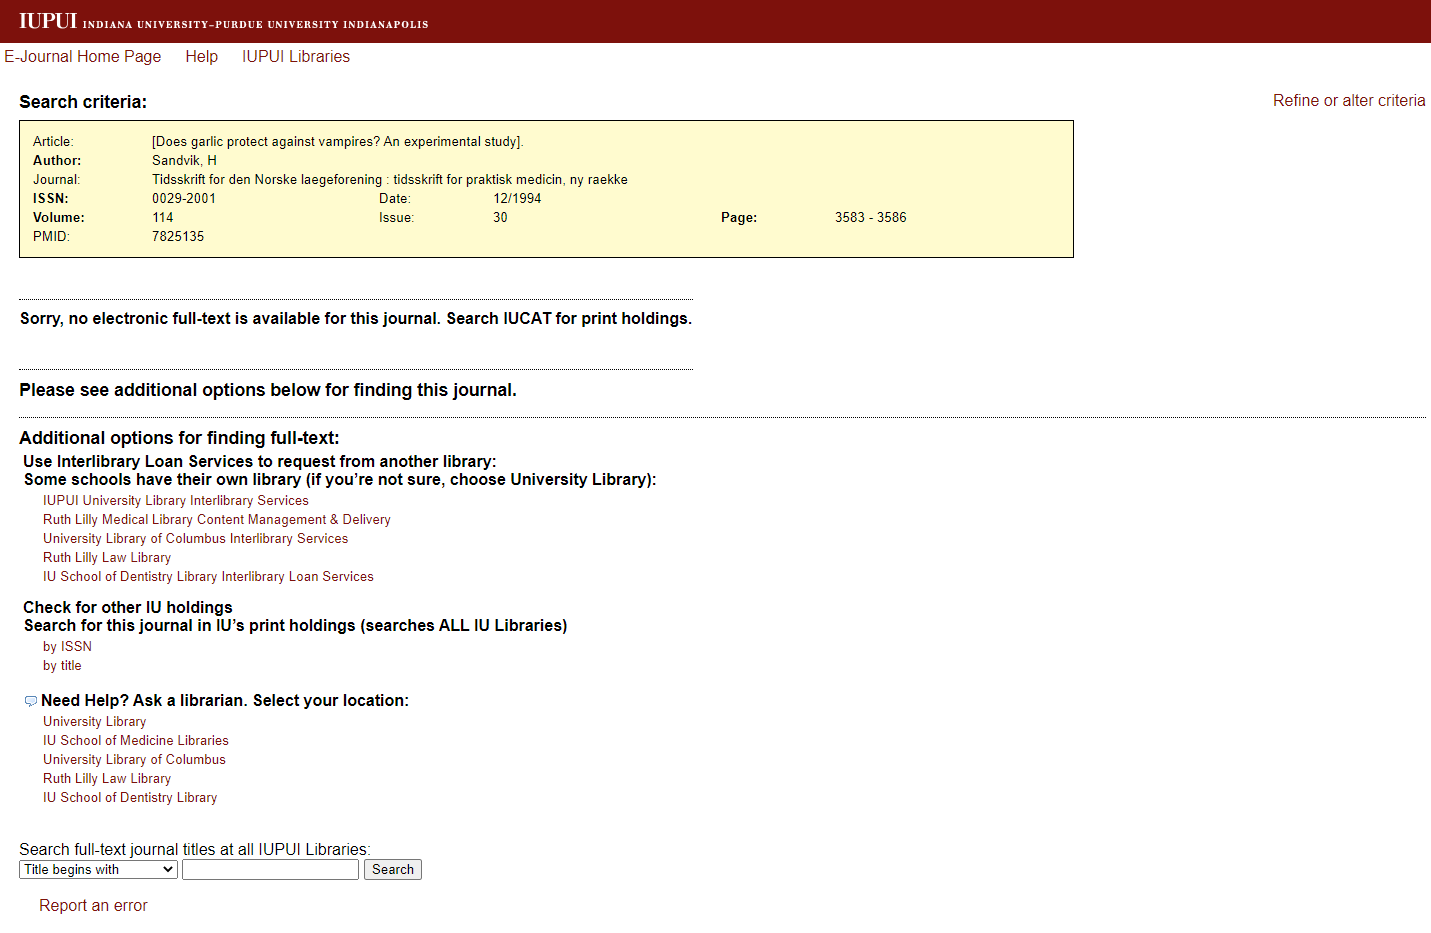 A screen shot of E-Journal Home Page from the IUPUI Libraries website